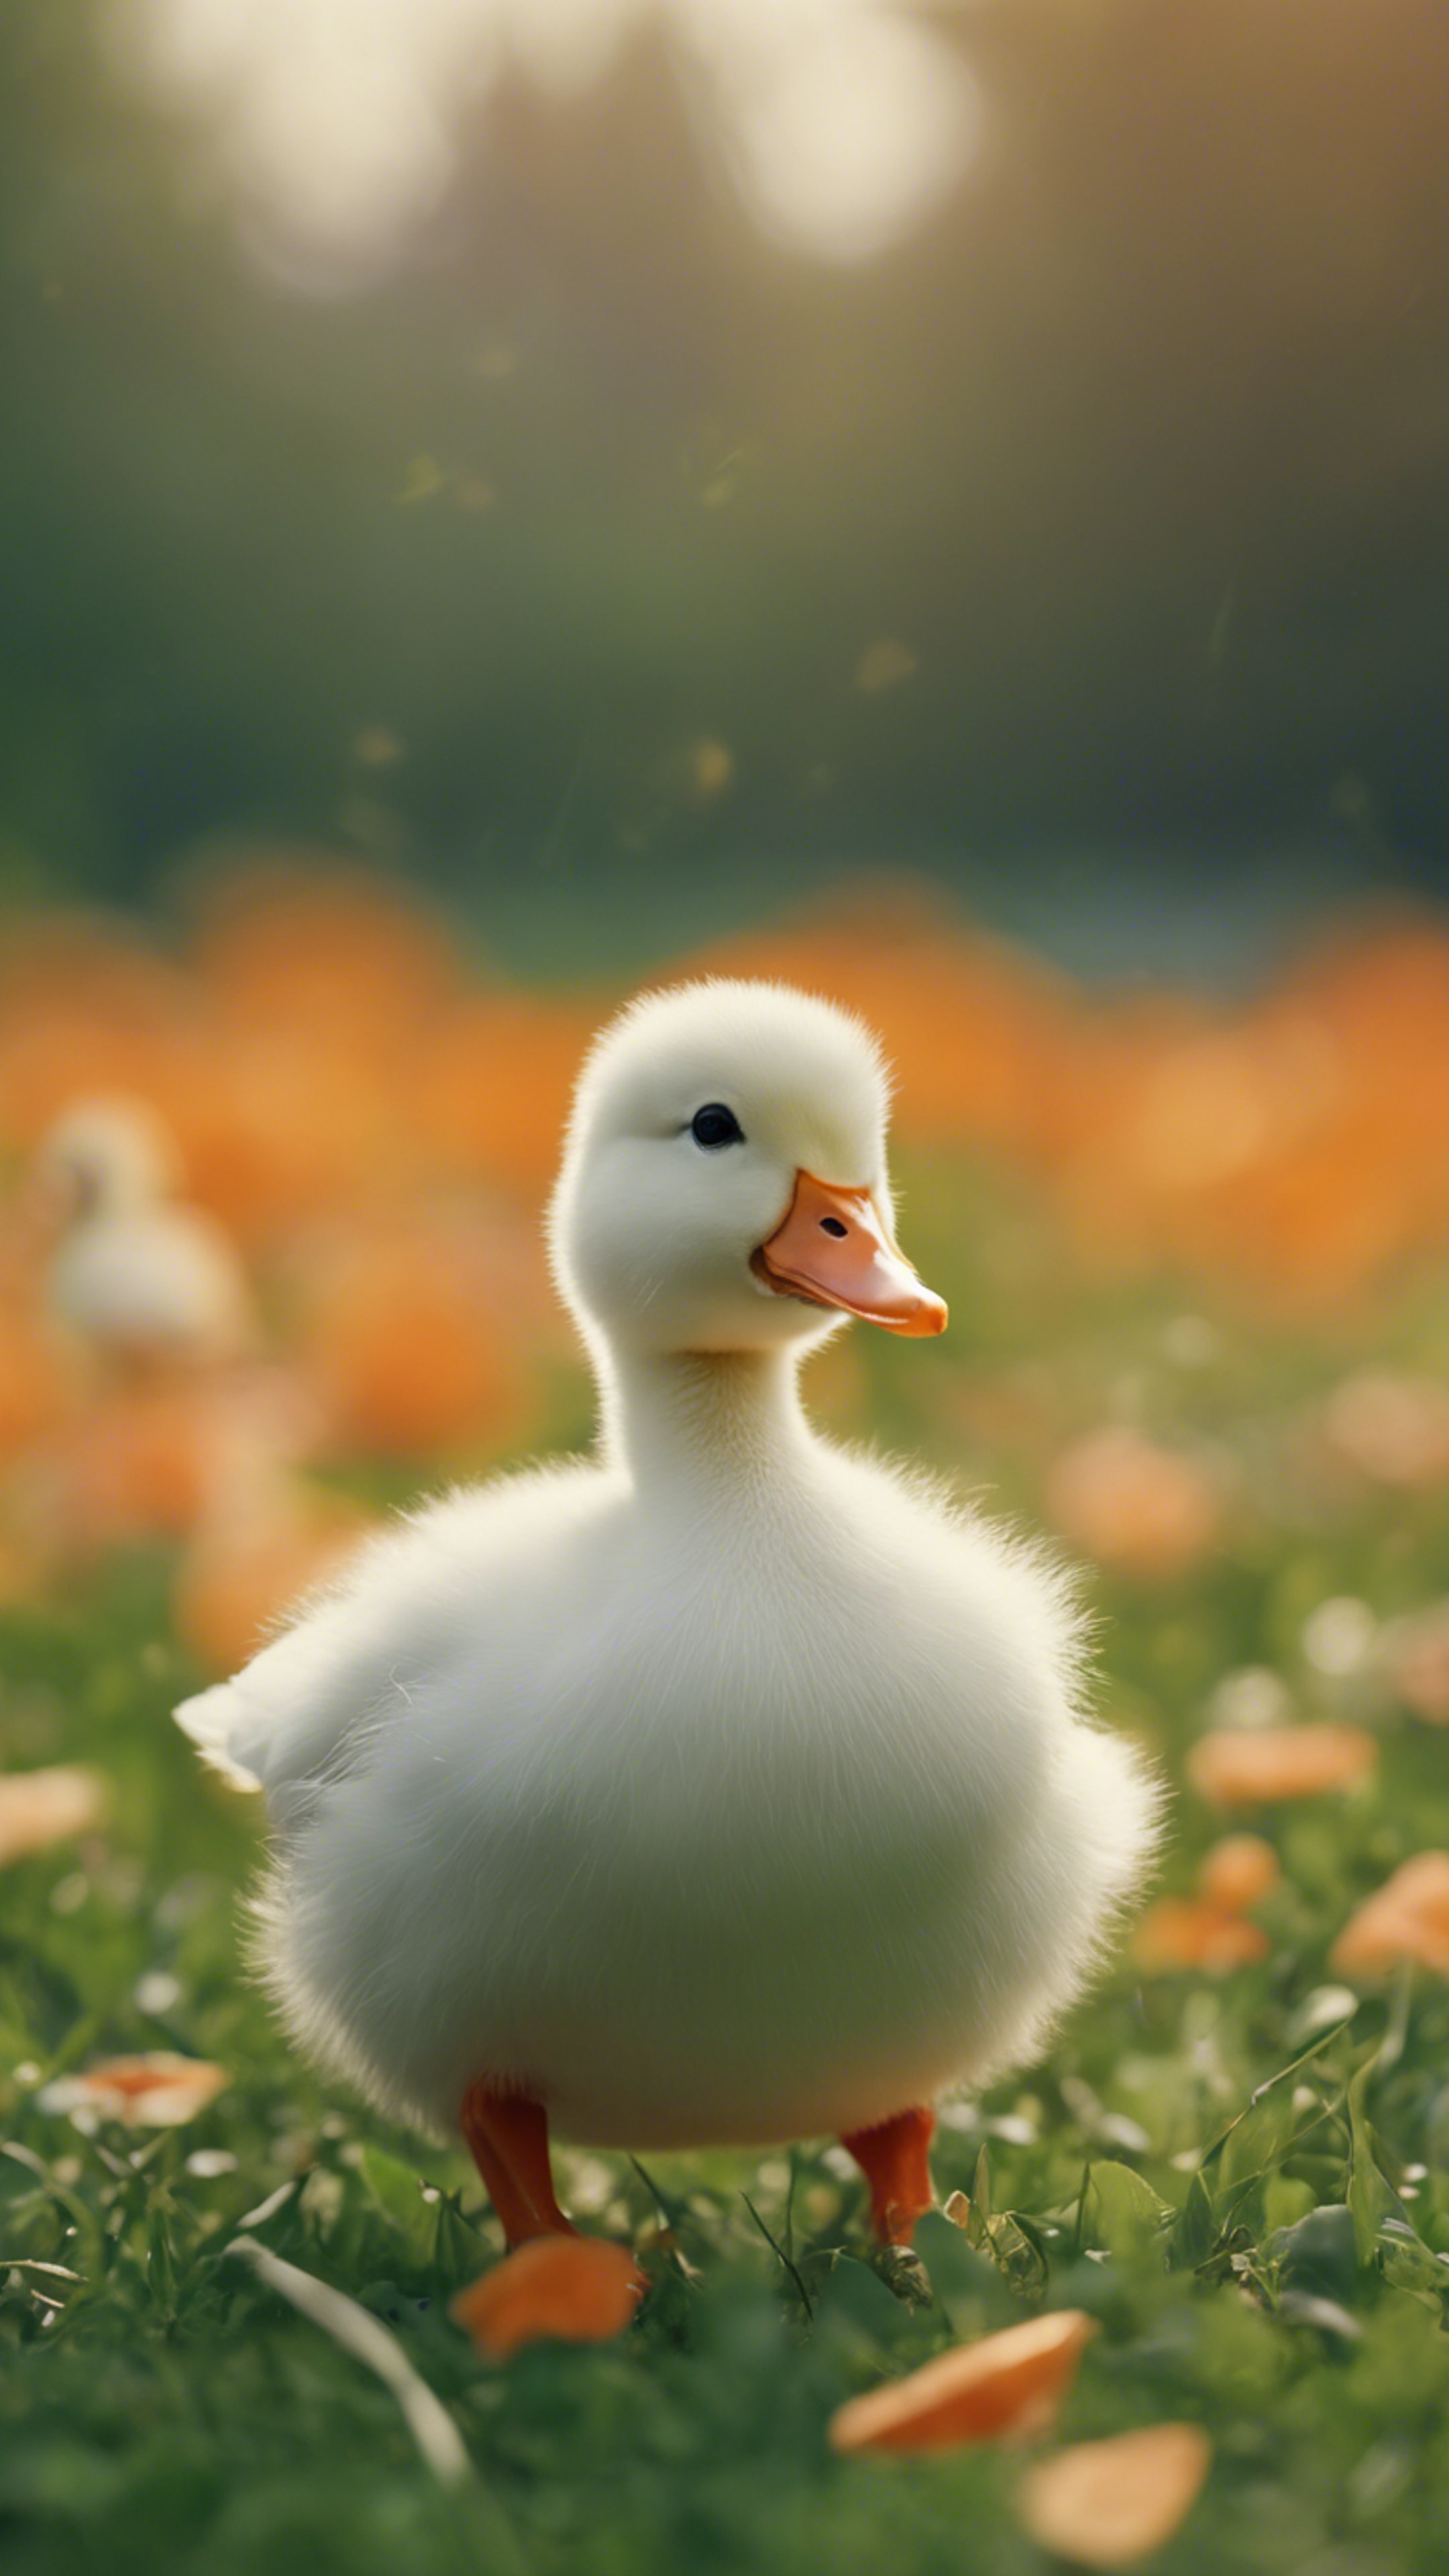 An adorable fluffy white duck with a bright orange bill is waddling happily across a green meadow. Шпалери[c976b0c80c1040dead0f]